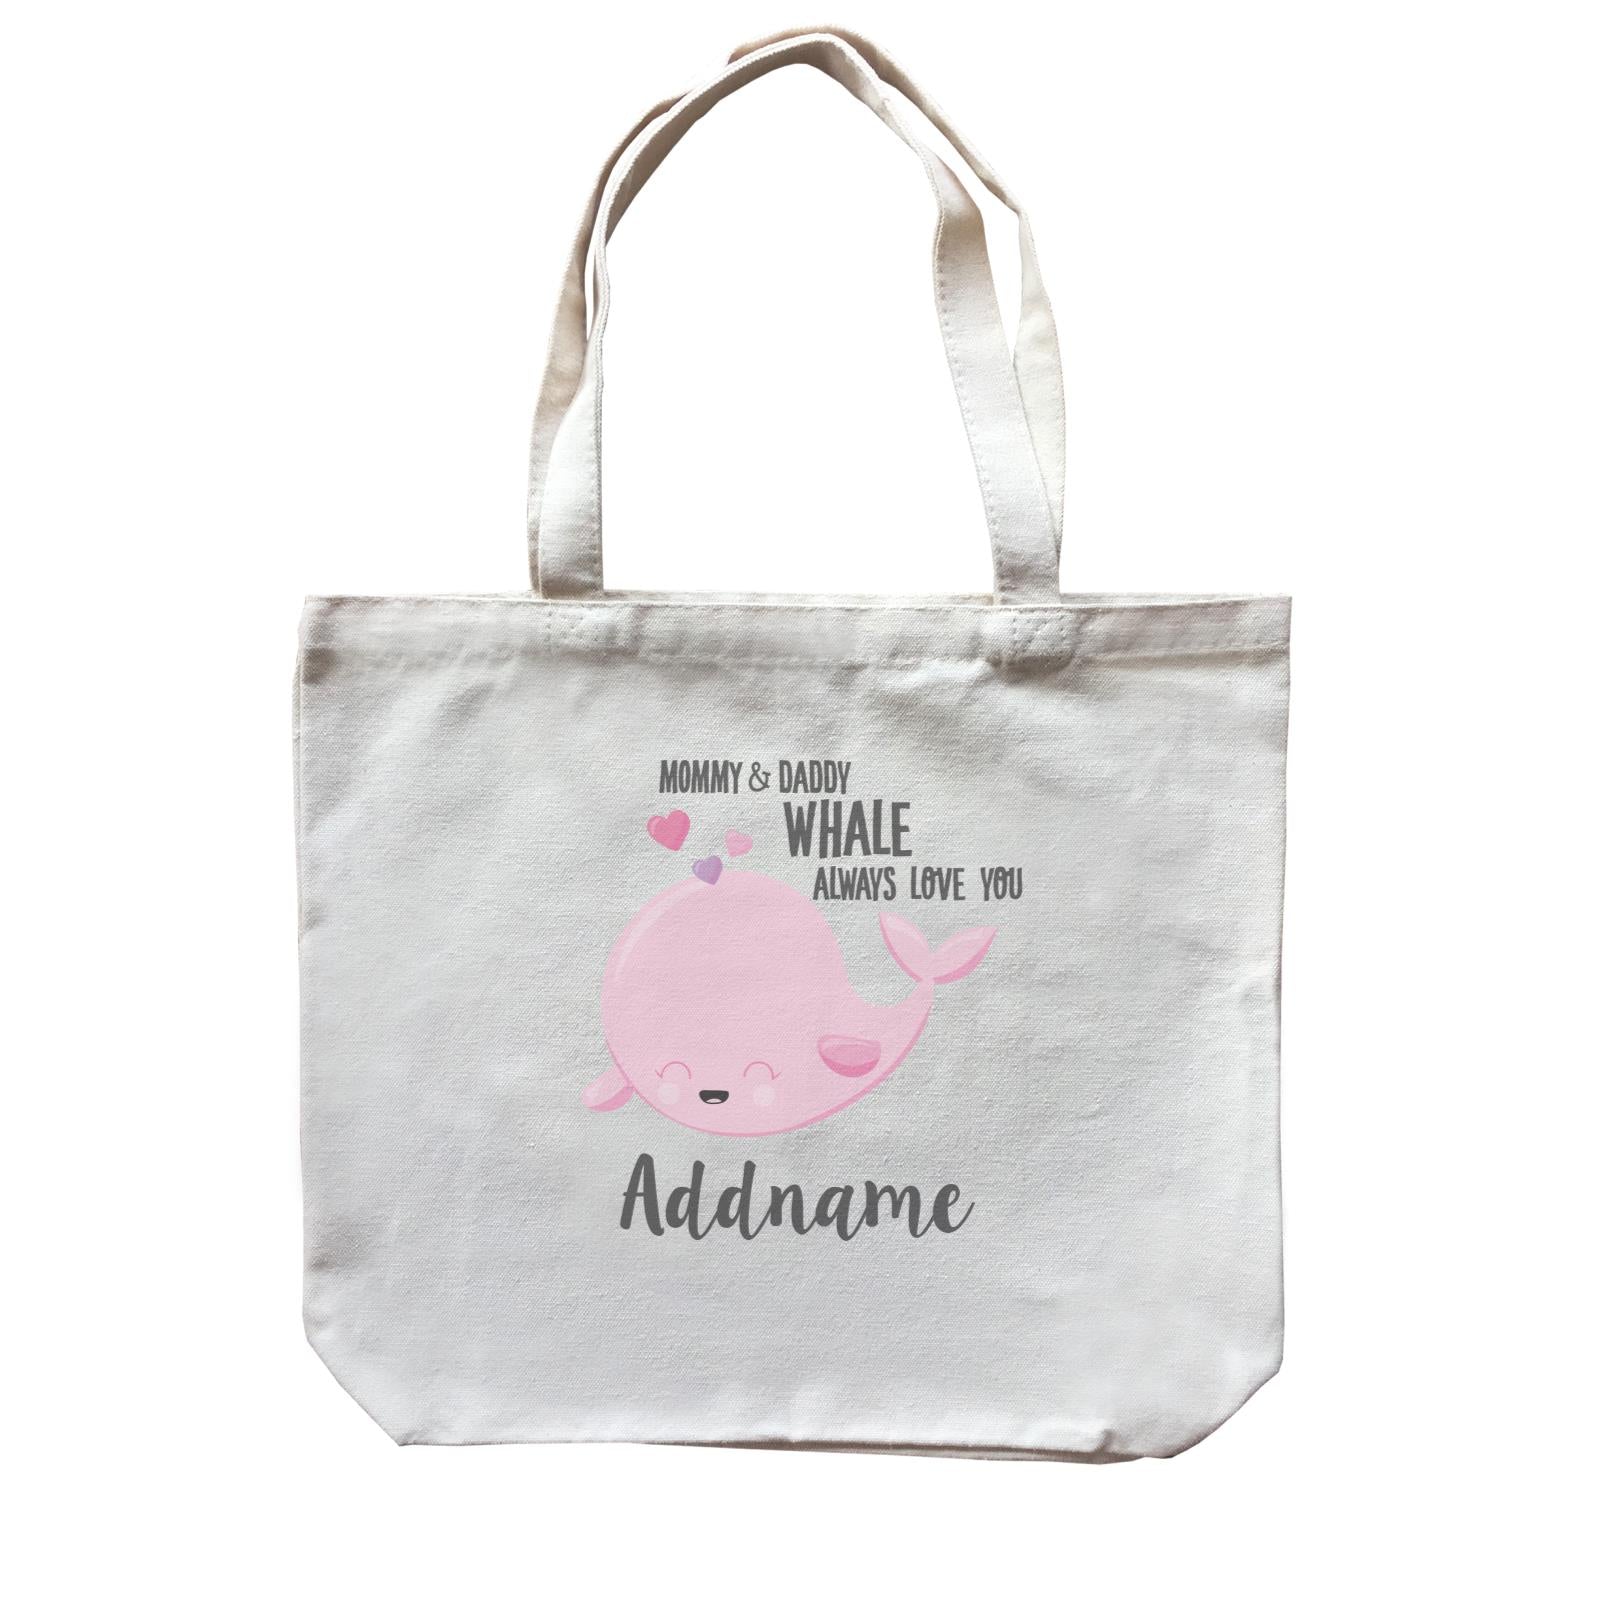 Cute Sea Animals Mommy & Daddy Whale Always Love You Addname Canvas Bag